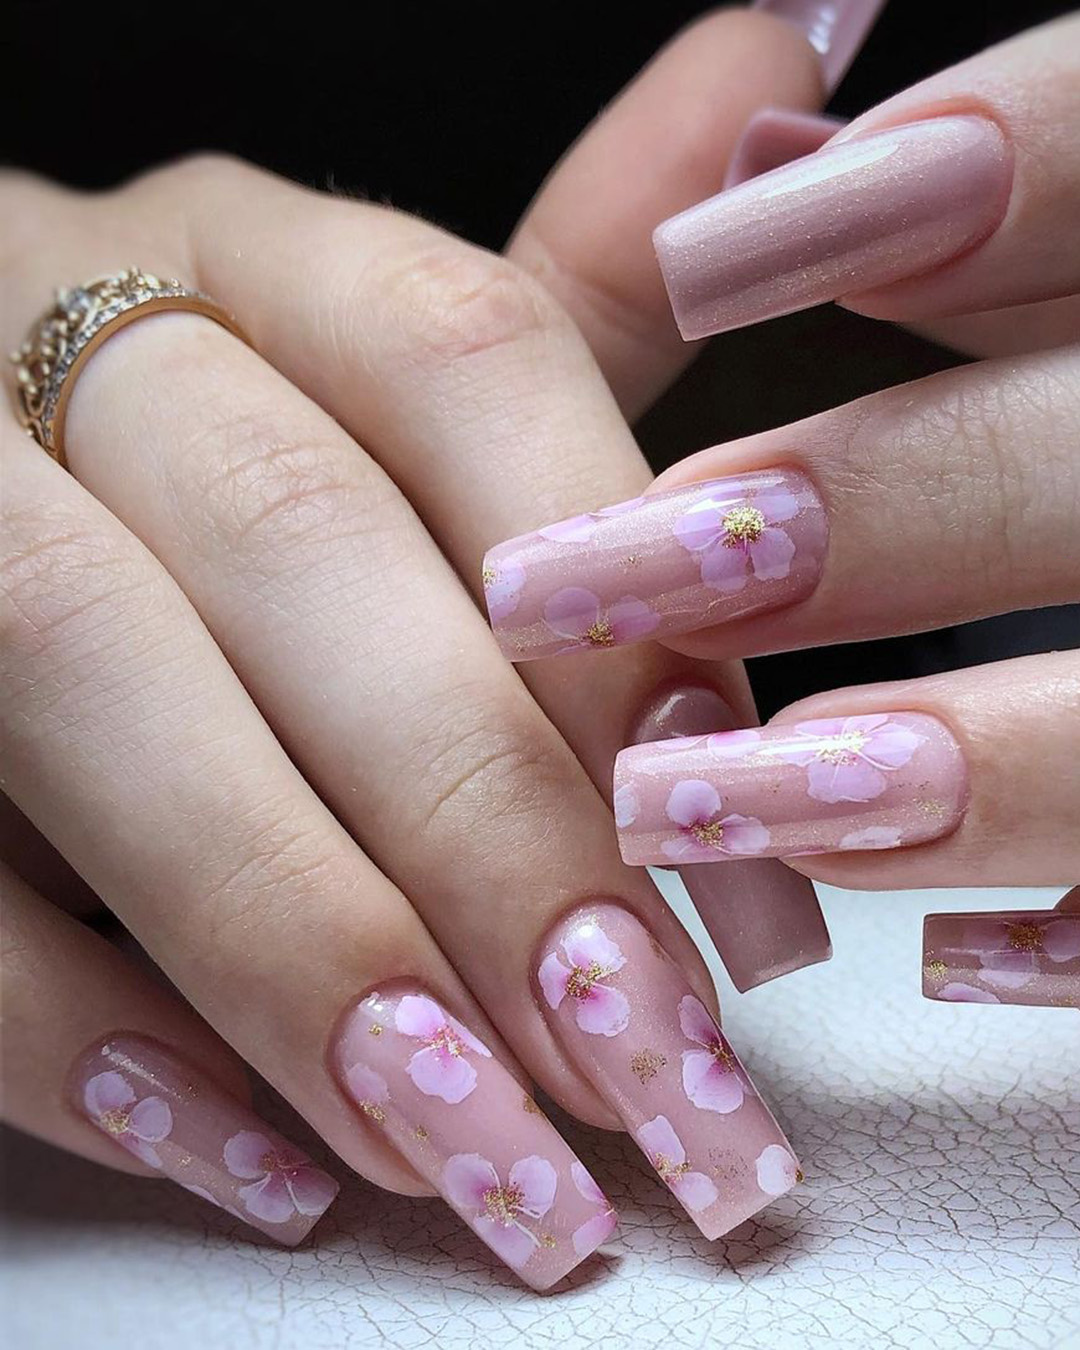 nude wedding nails with painted rose flowers tatjana_ost